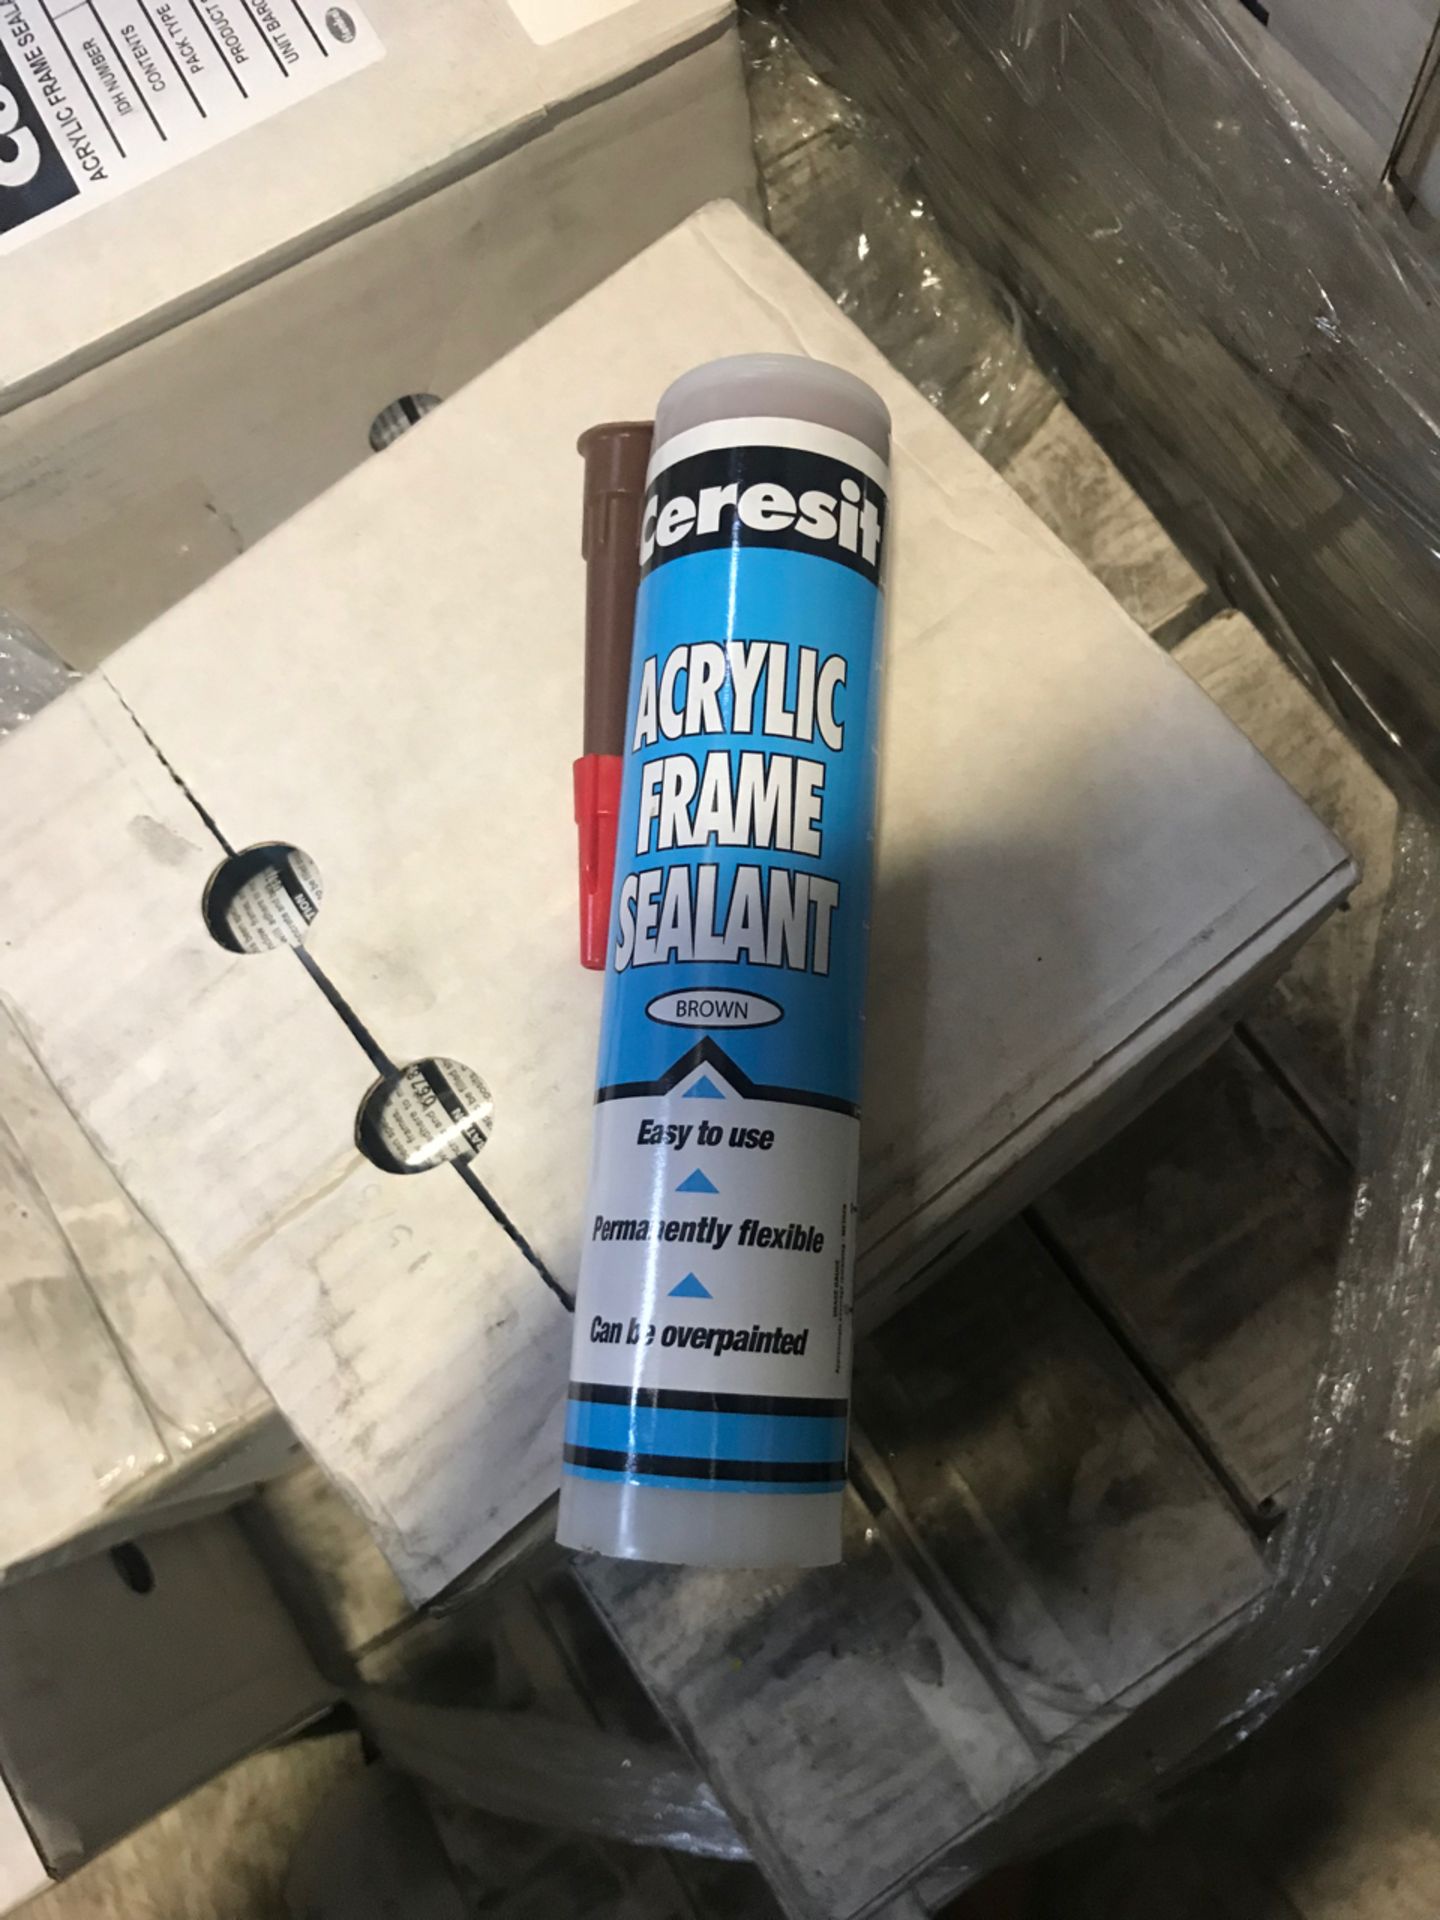 Pallet No- 16 - 40 Boxes Of Ceresit Acrylic Frame Sealant In Brown, 12 Per Box - Image 2 of 5